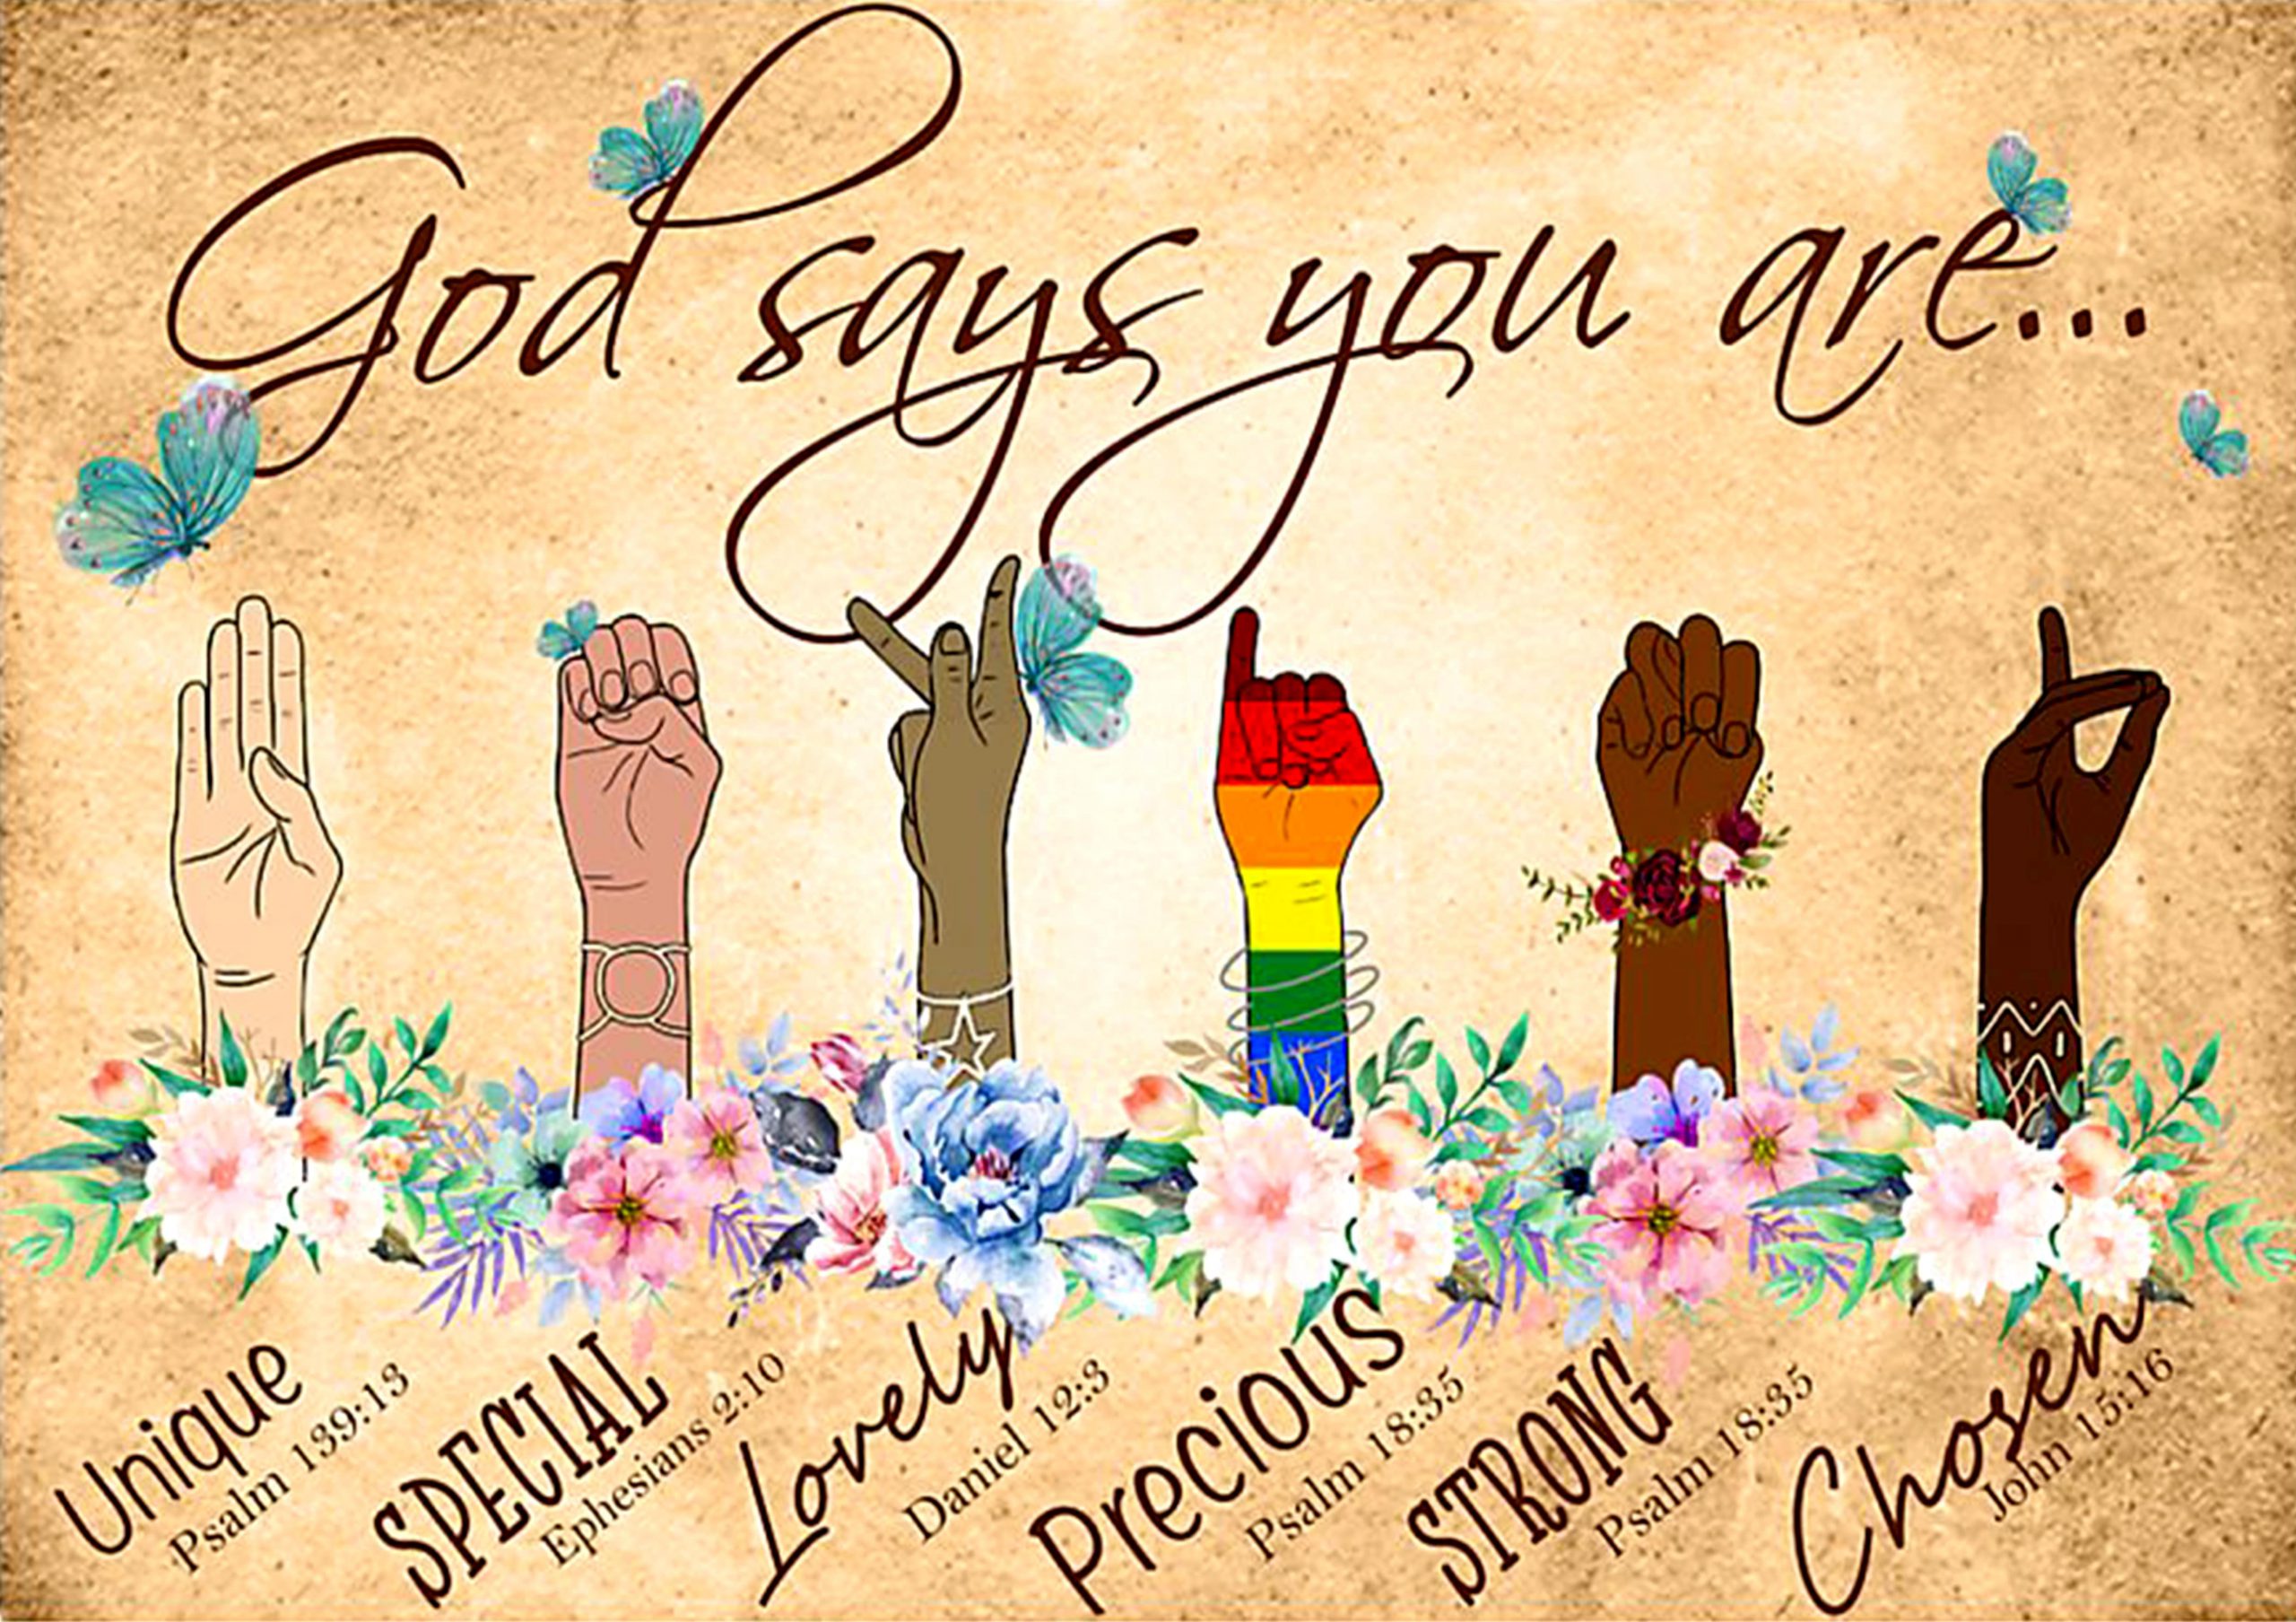 vintage God says you are poster 1 - Copy